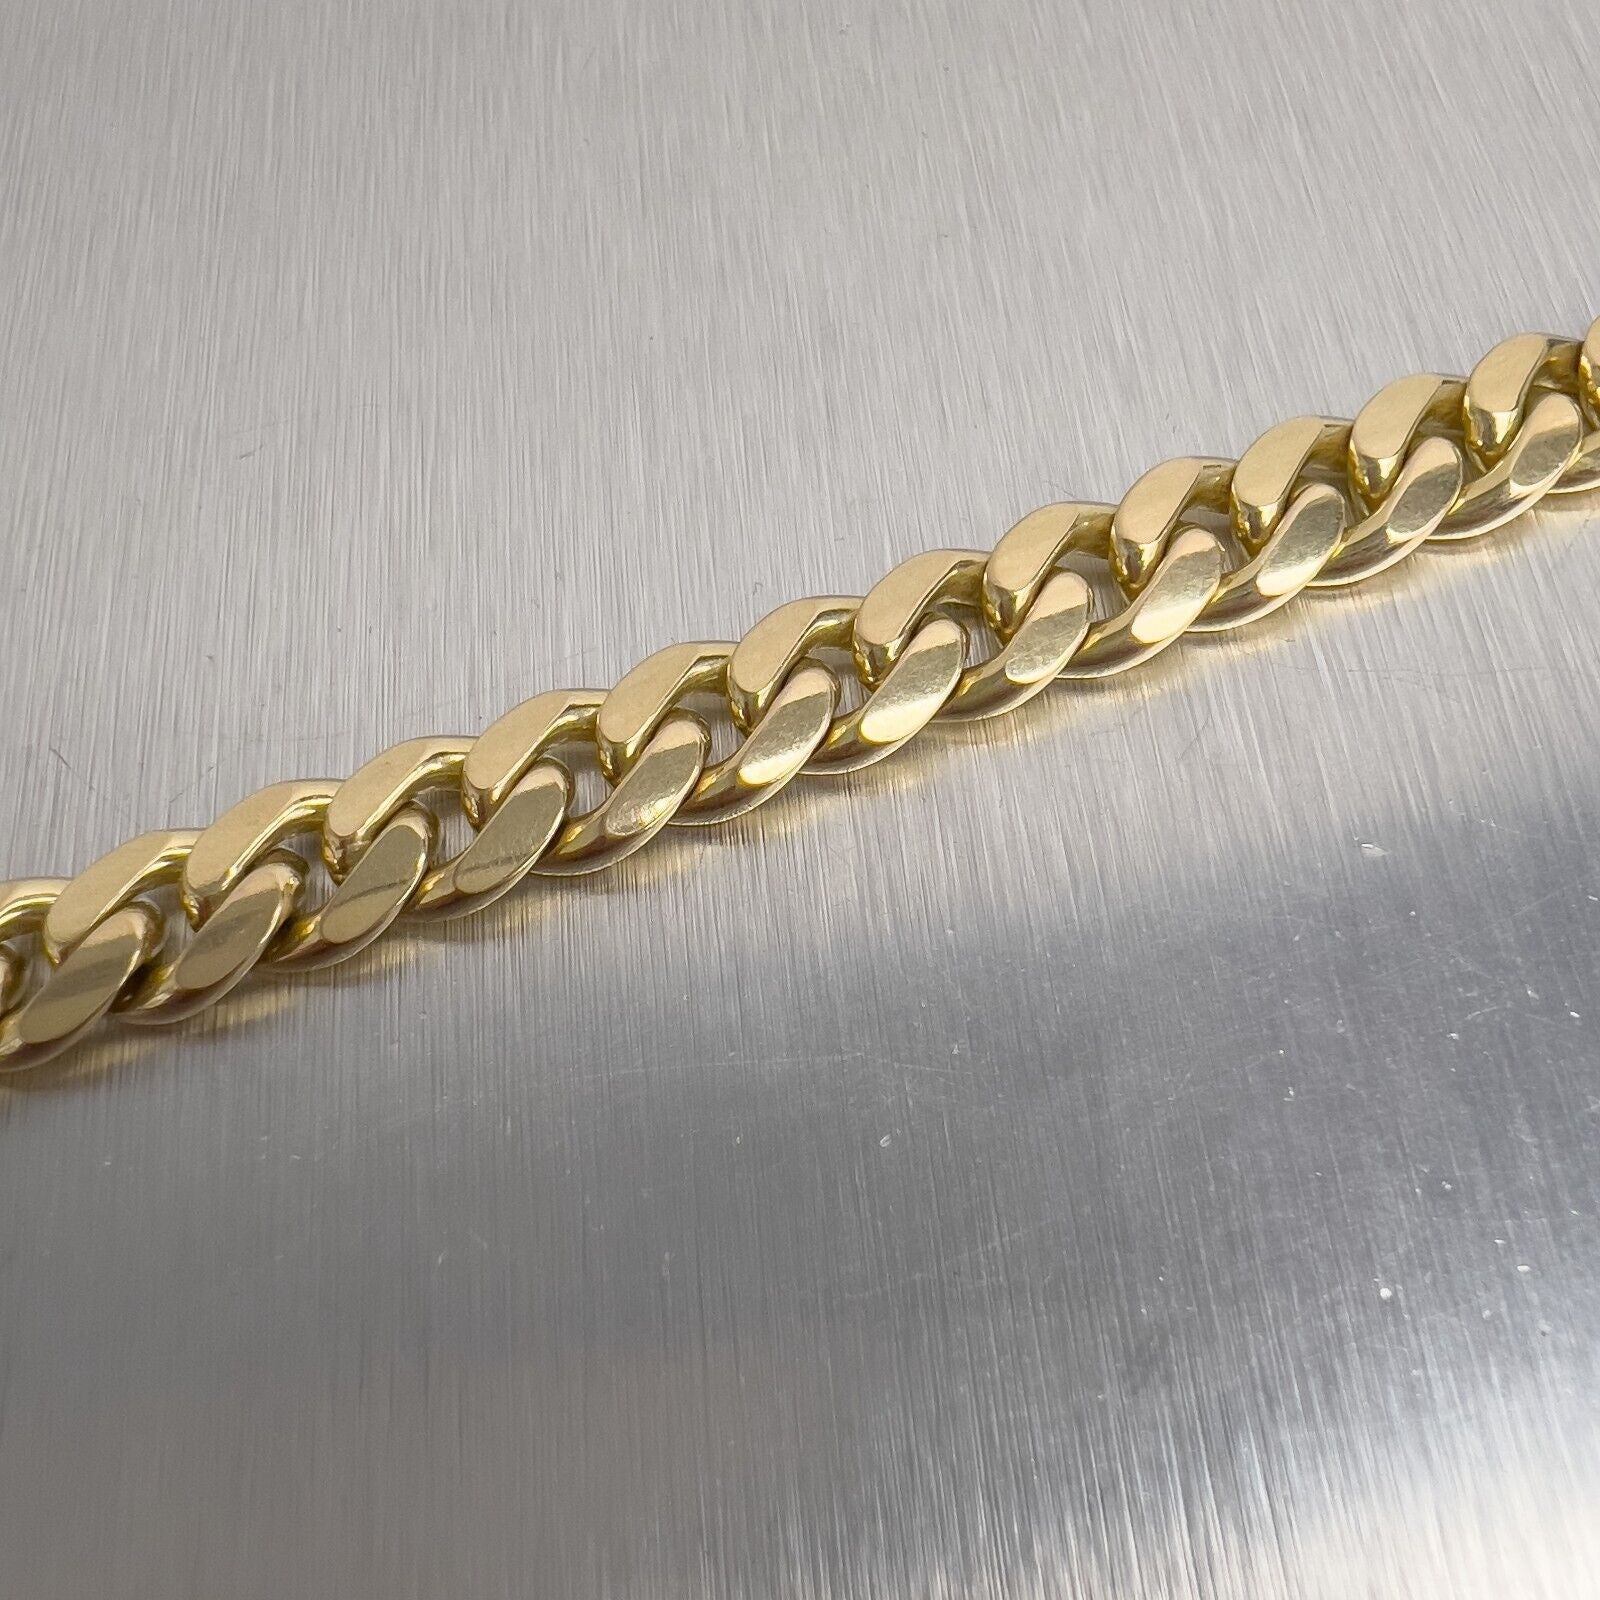 14k Yellow Gold Miami Cuban Curb Link 8.80mm Chain Necklace 24" 124.4g HEAVY